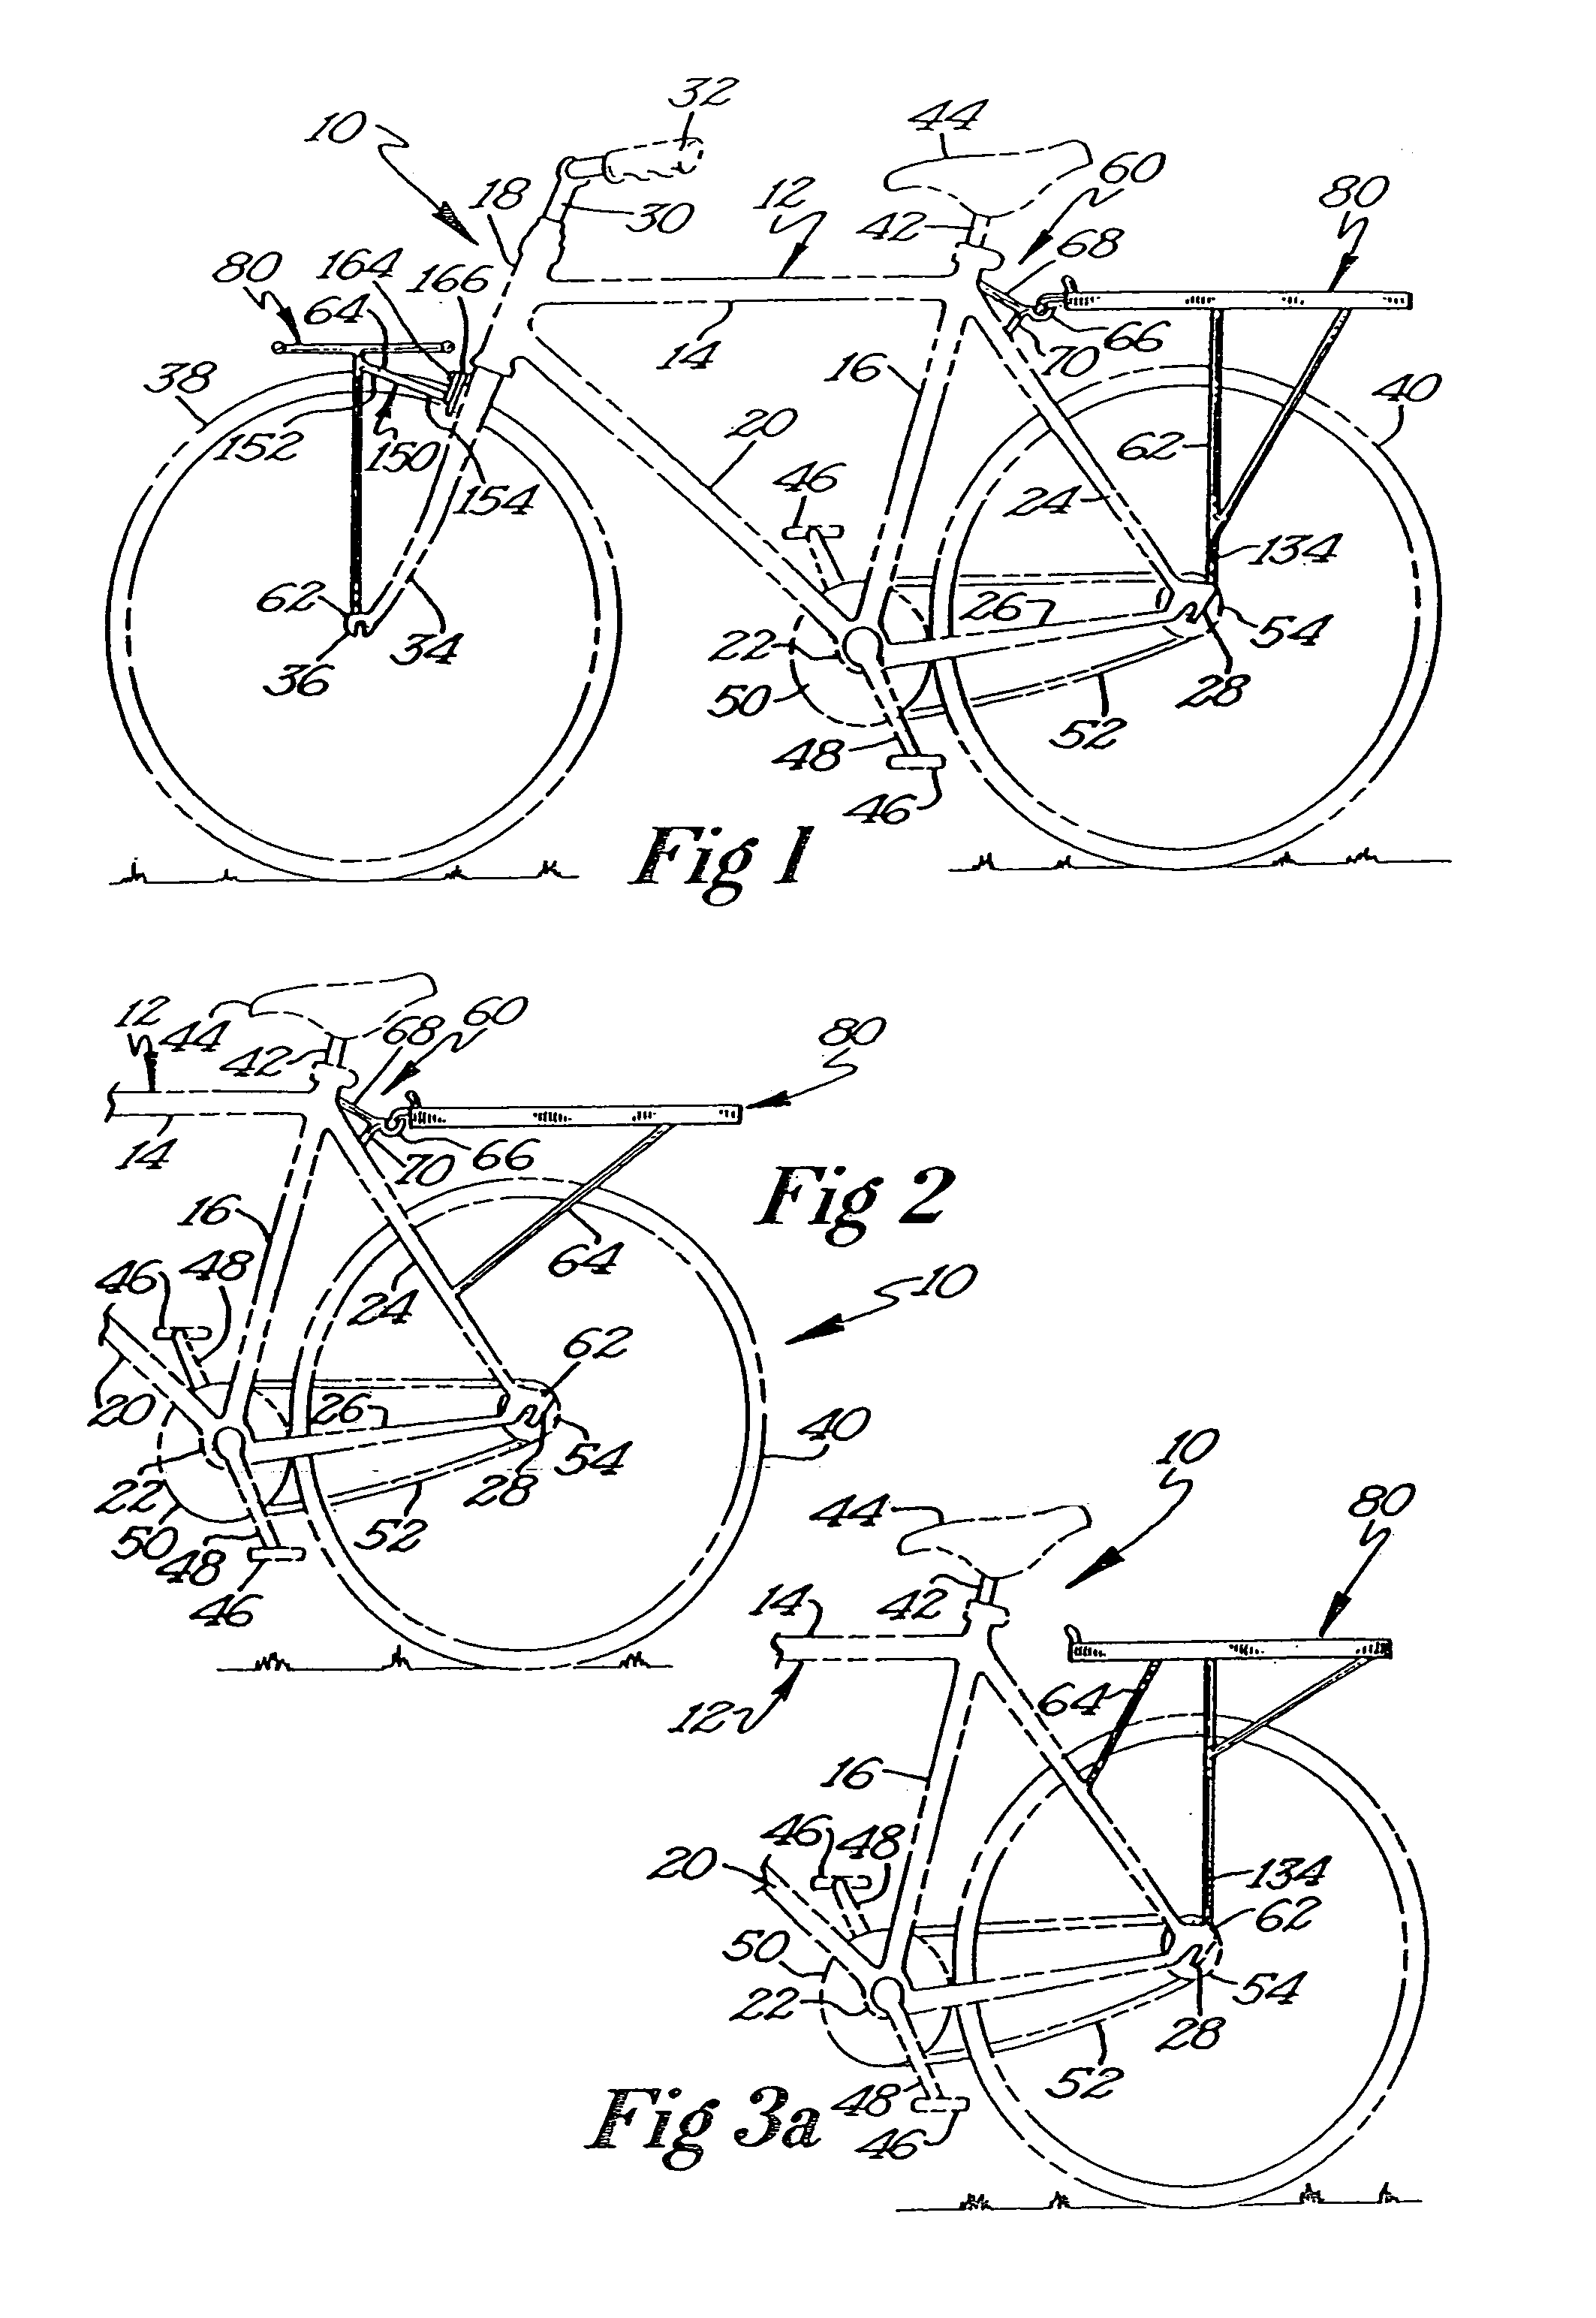 Attachment system for bicycle accessories